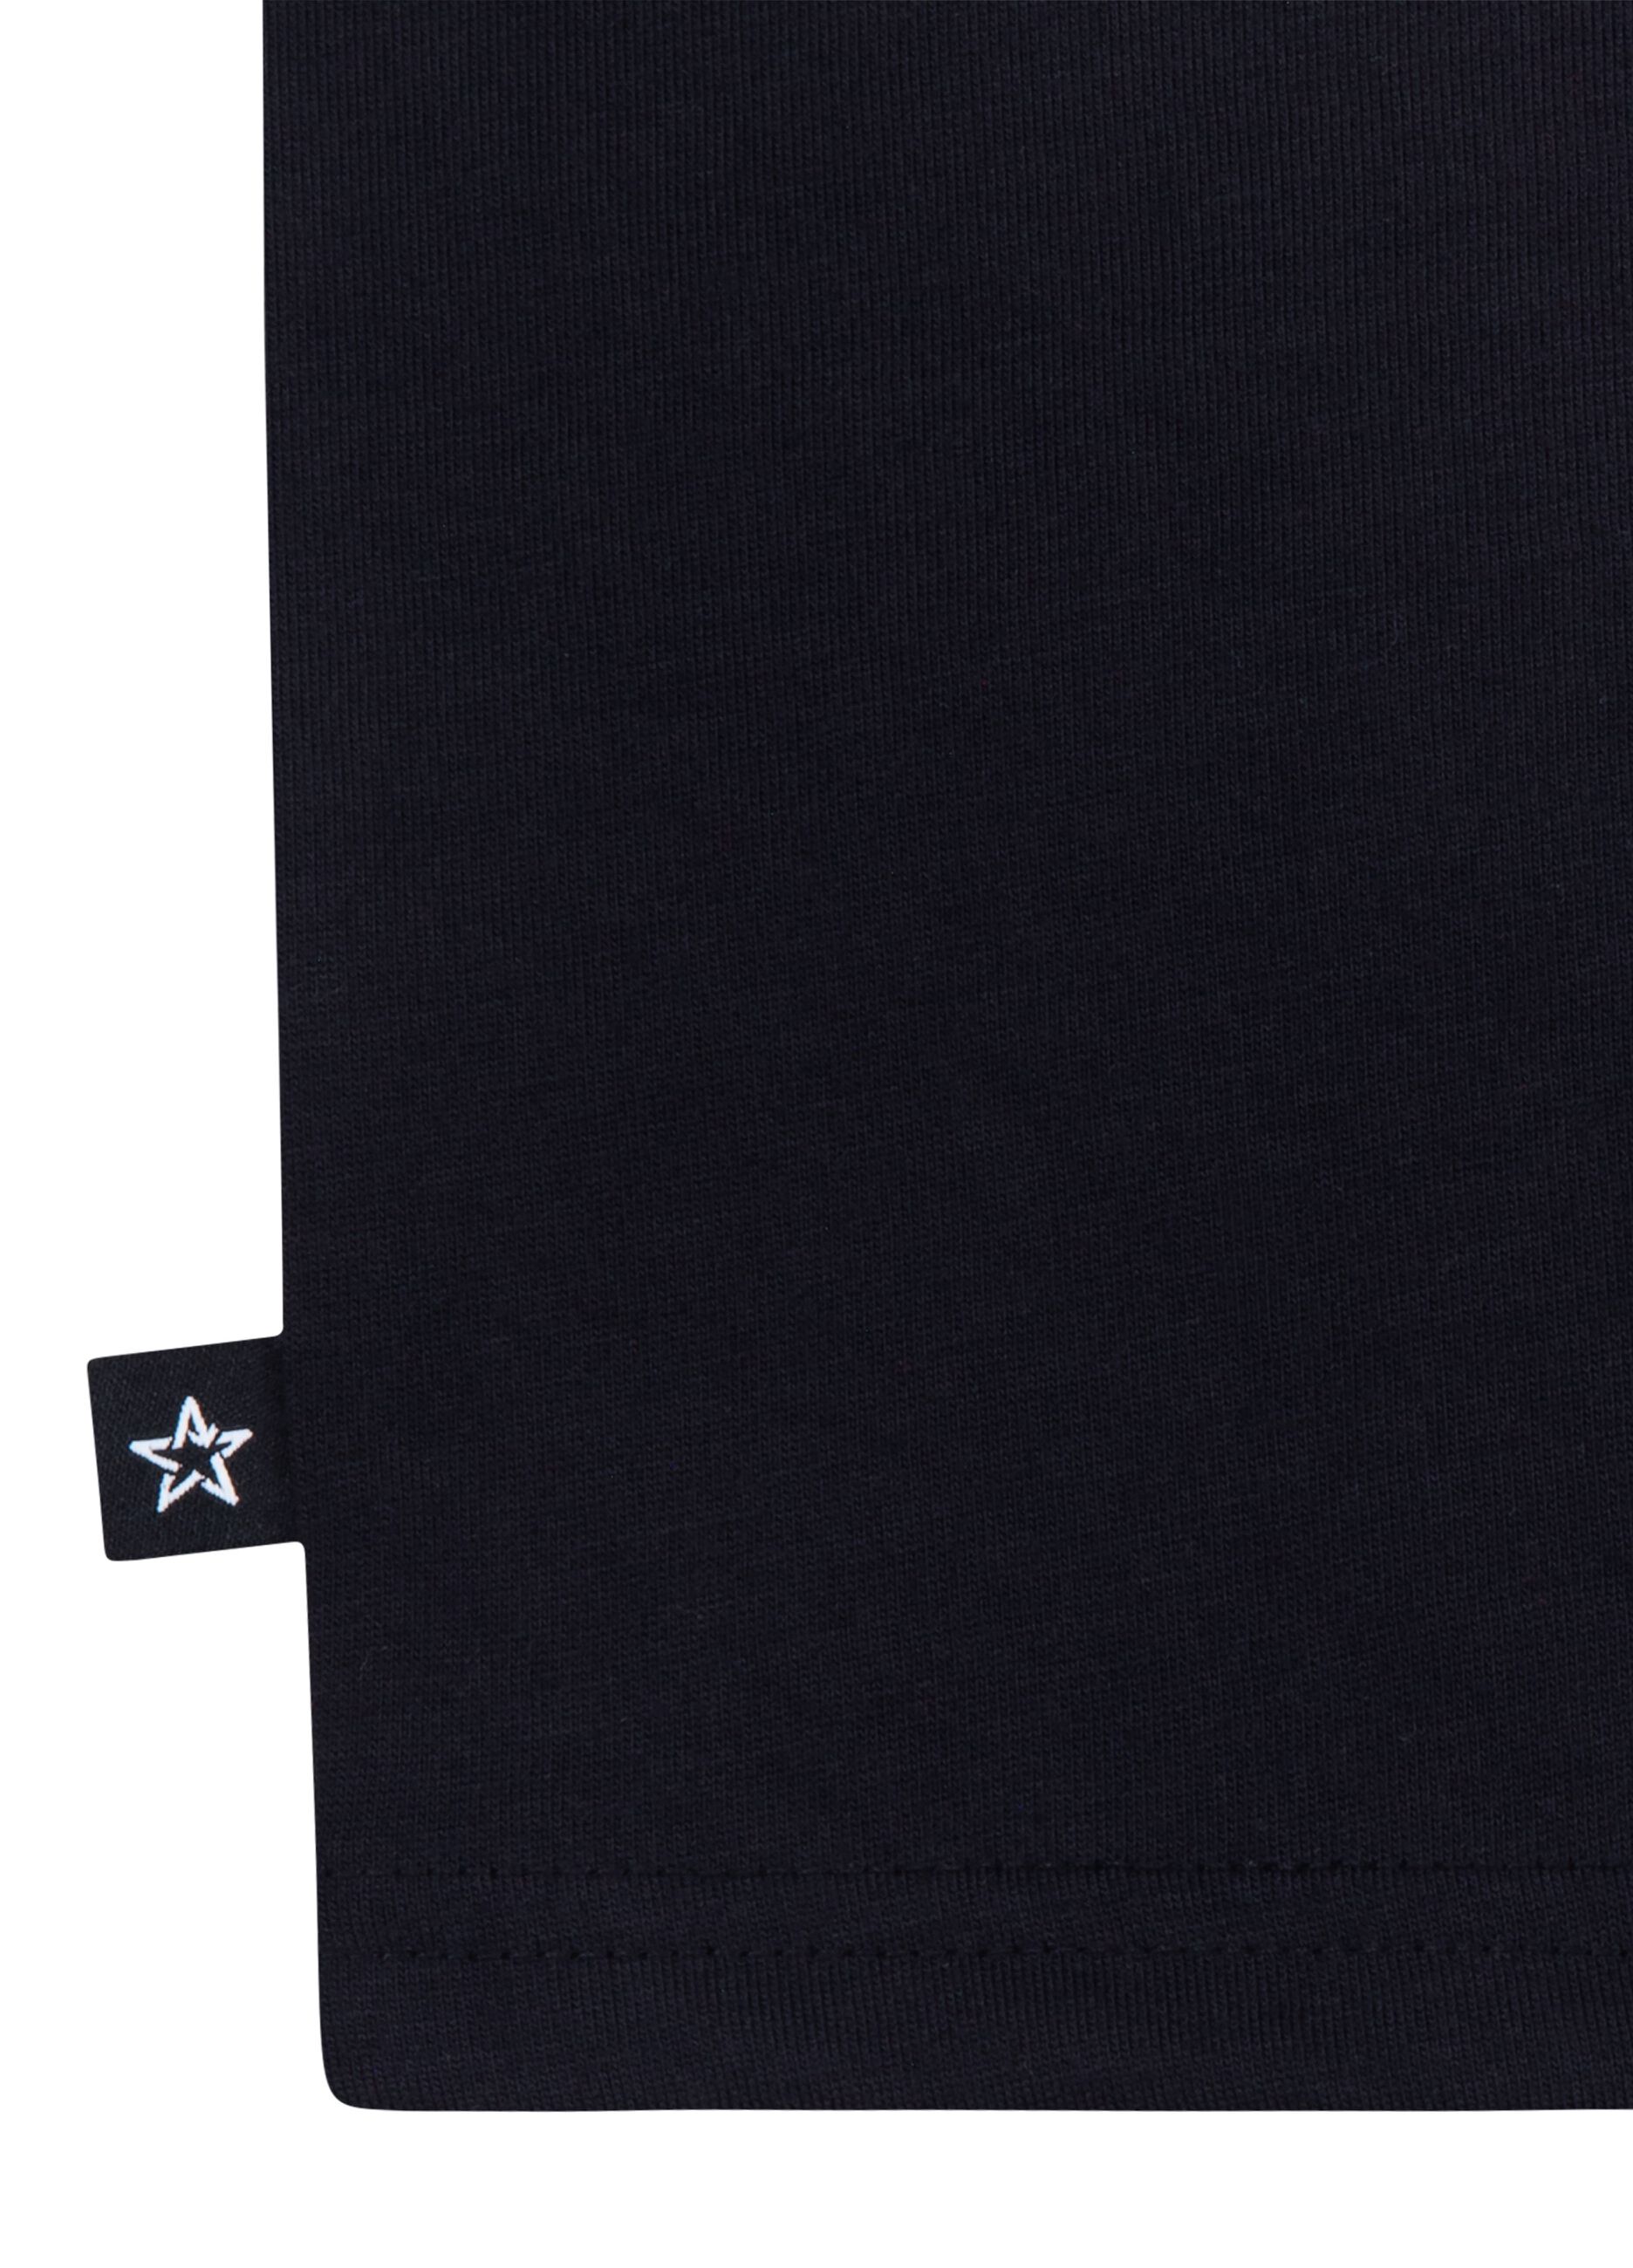 Boxy fit T-shirt with Chuck Patch logo print